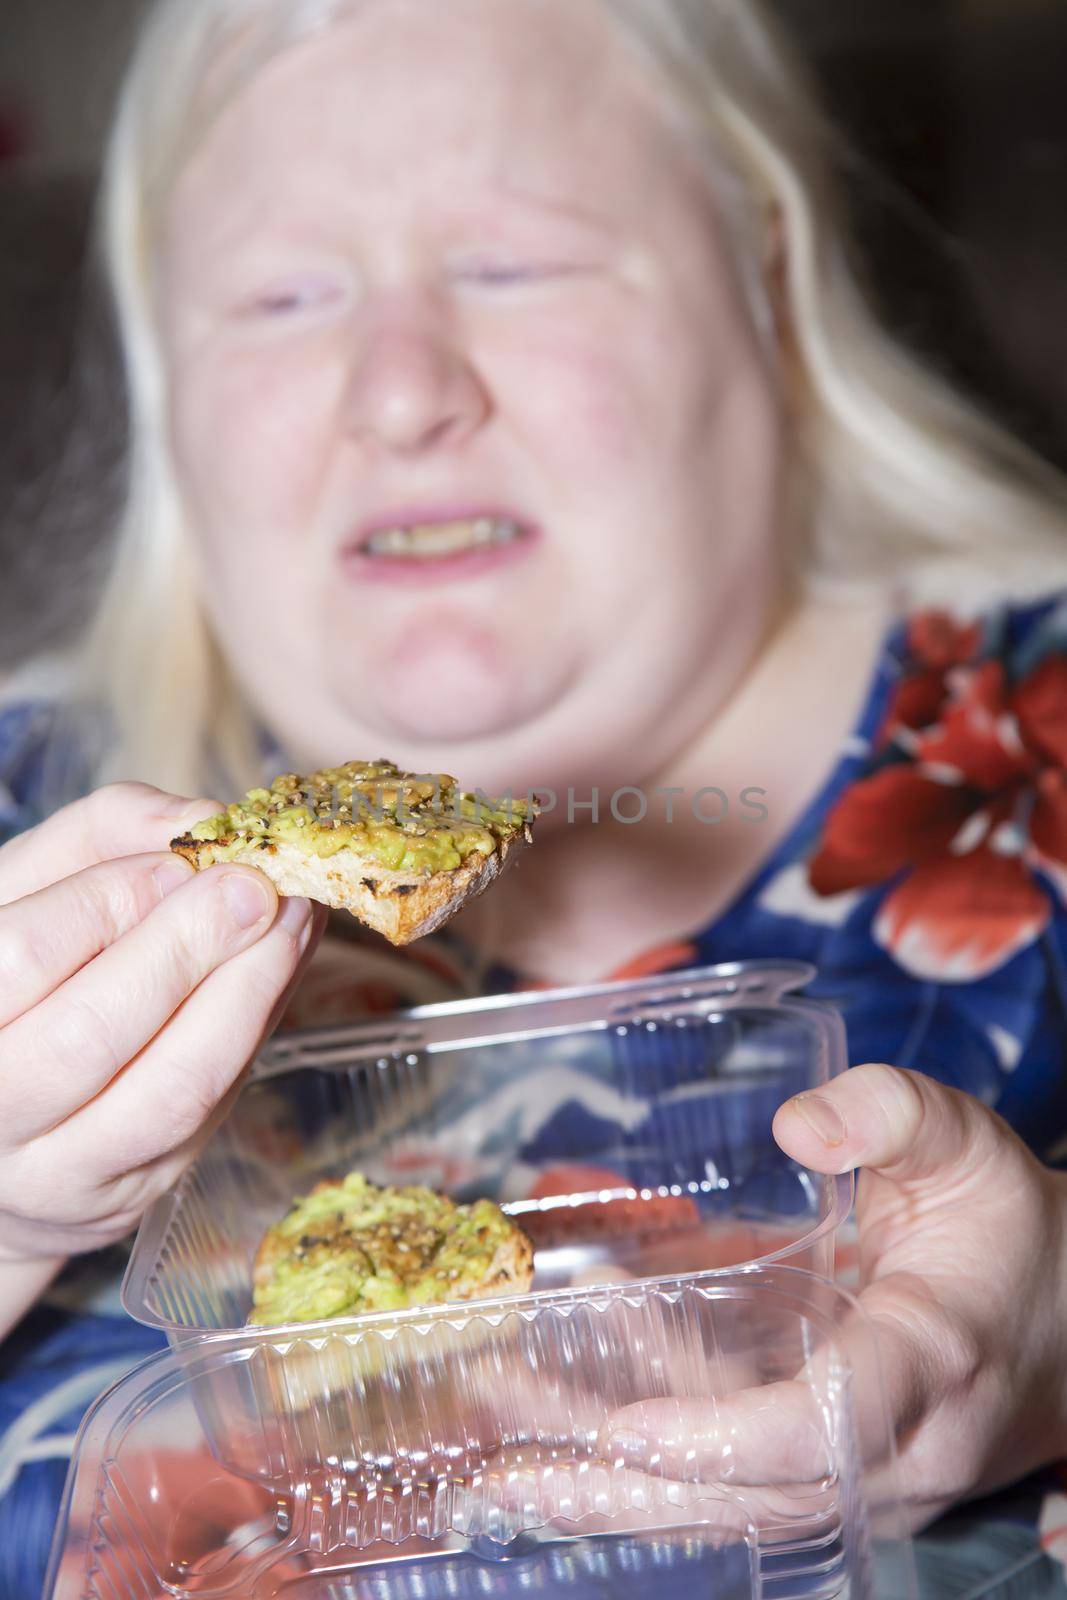 Albino woman suddenly gets a stomach ache while eating avocado toast